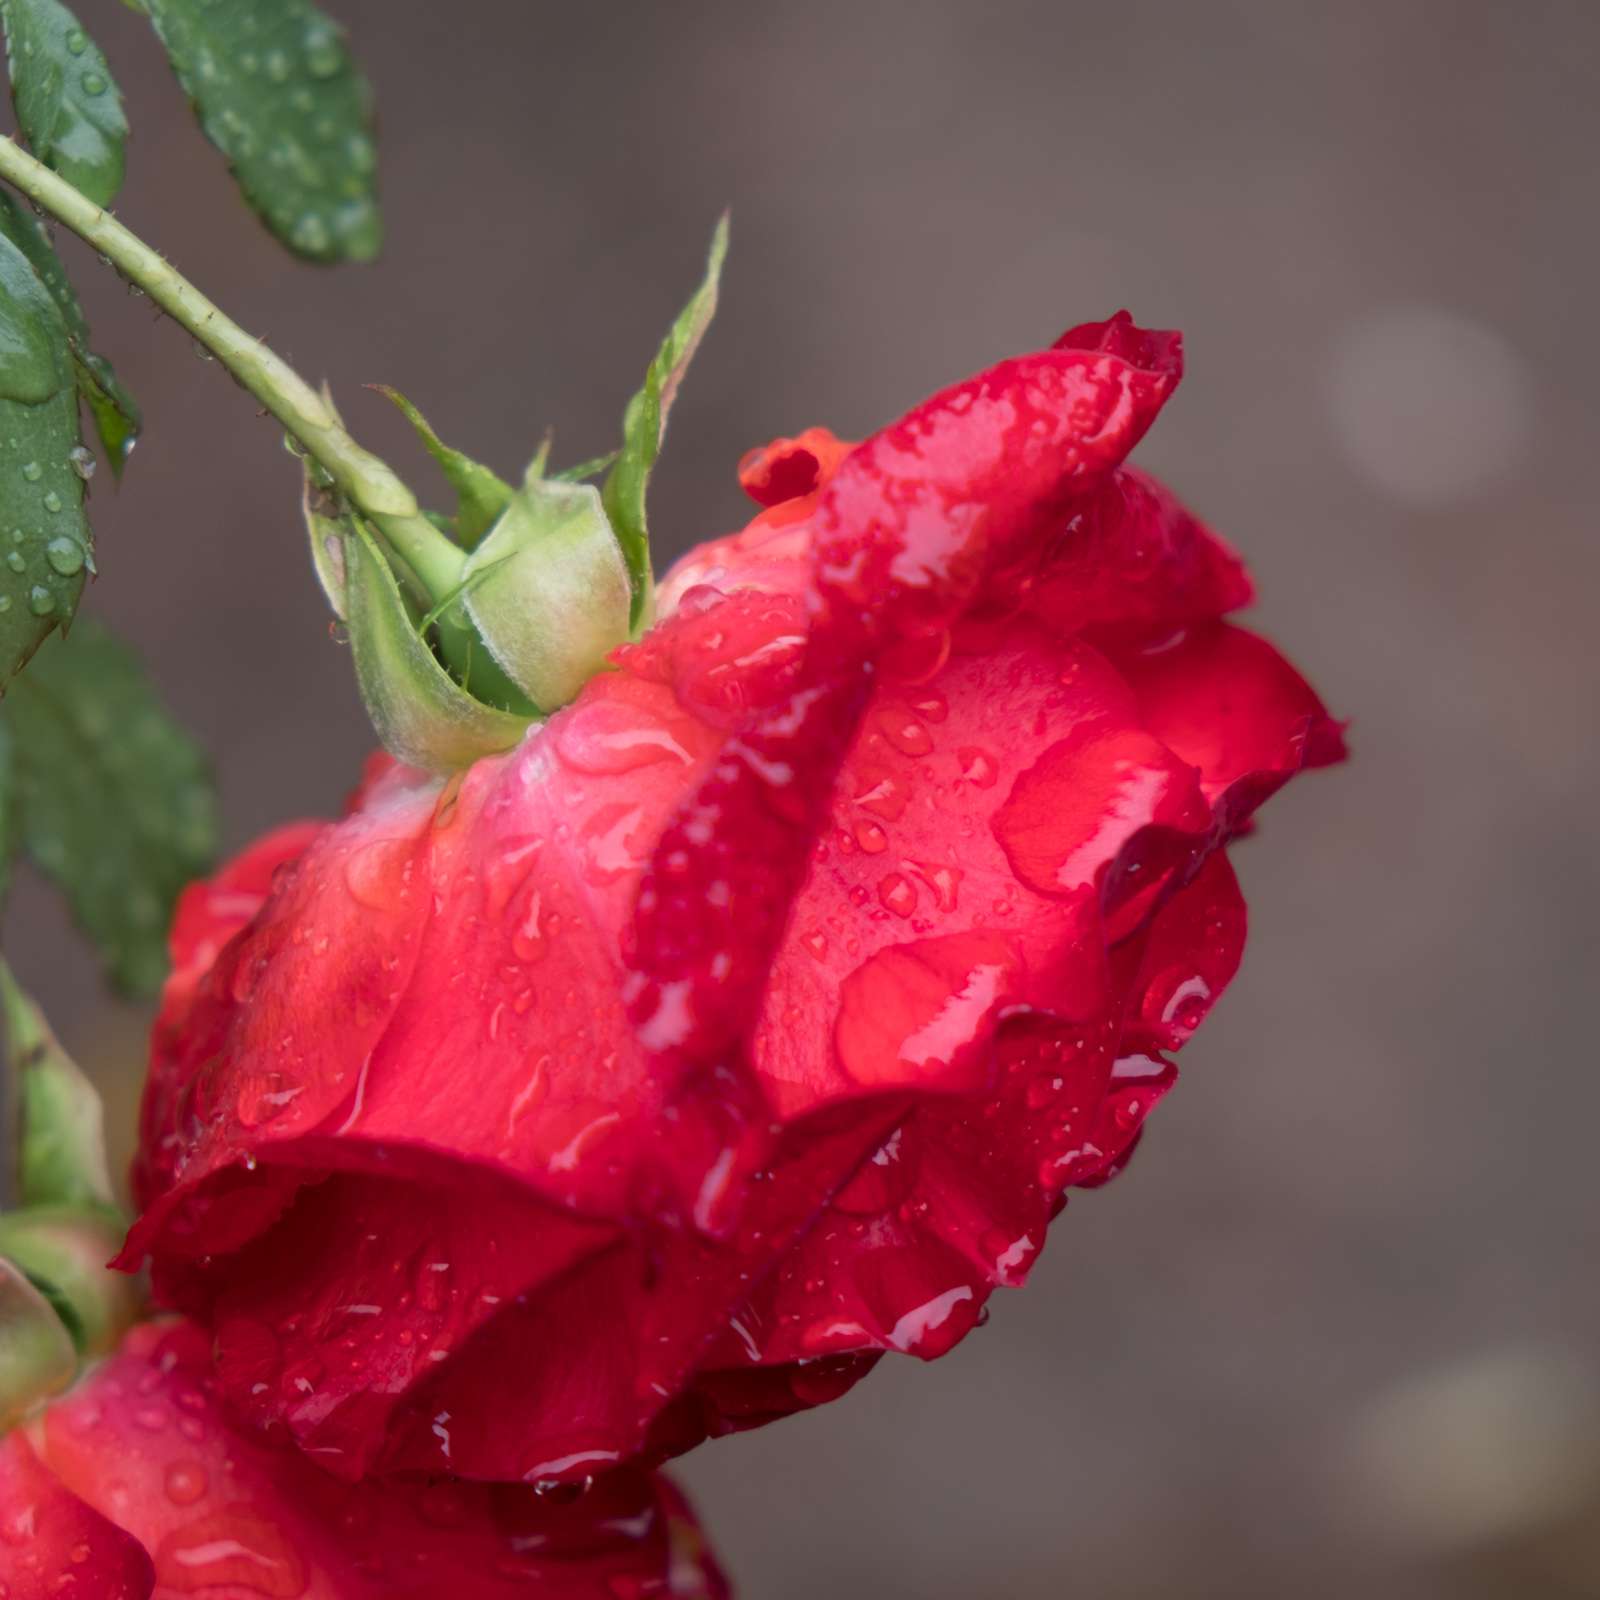 A wet red rose in the gardens of The Alhambra, Granada